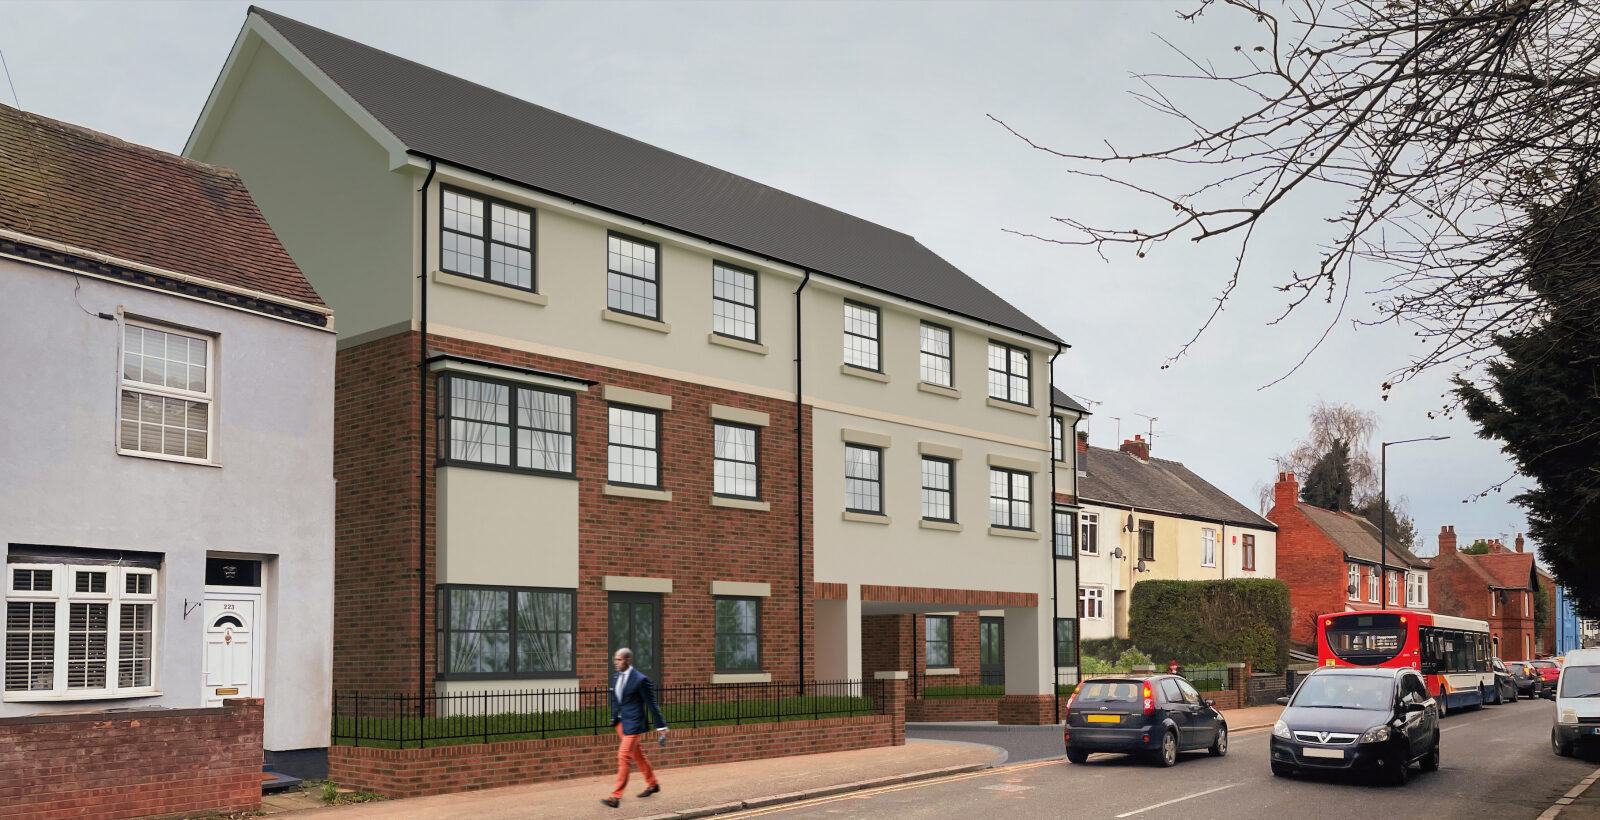 2XL Commercial Finance MD Darren Willoughby completes a £3.45 million development exit loan for a 32-apartment scheme in Nuneaton